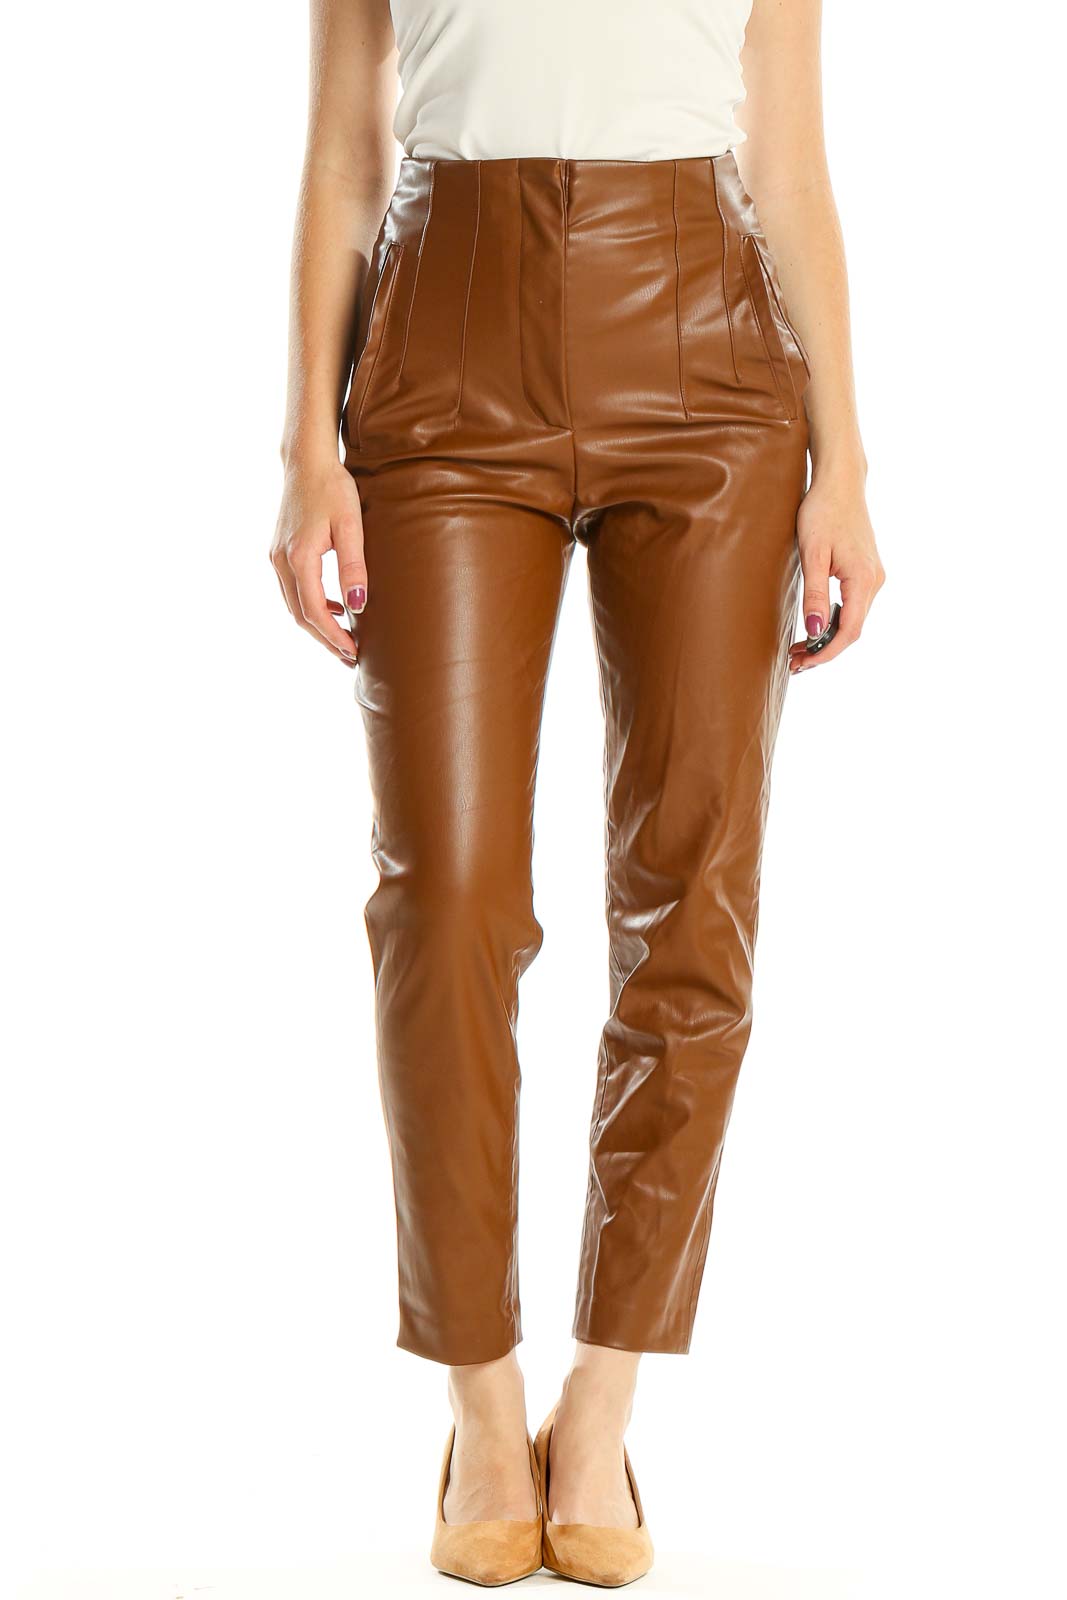 Zara Faux Leather High Waisted Leggings (size S) | High waisted leather  leggings, High waisted leggings, Faux leather